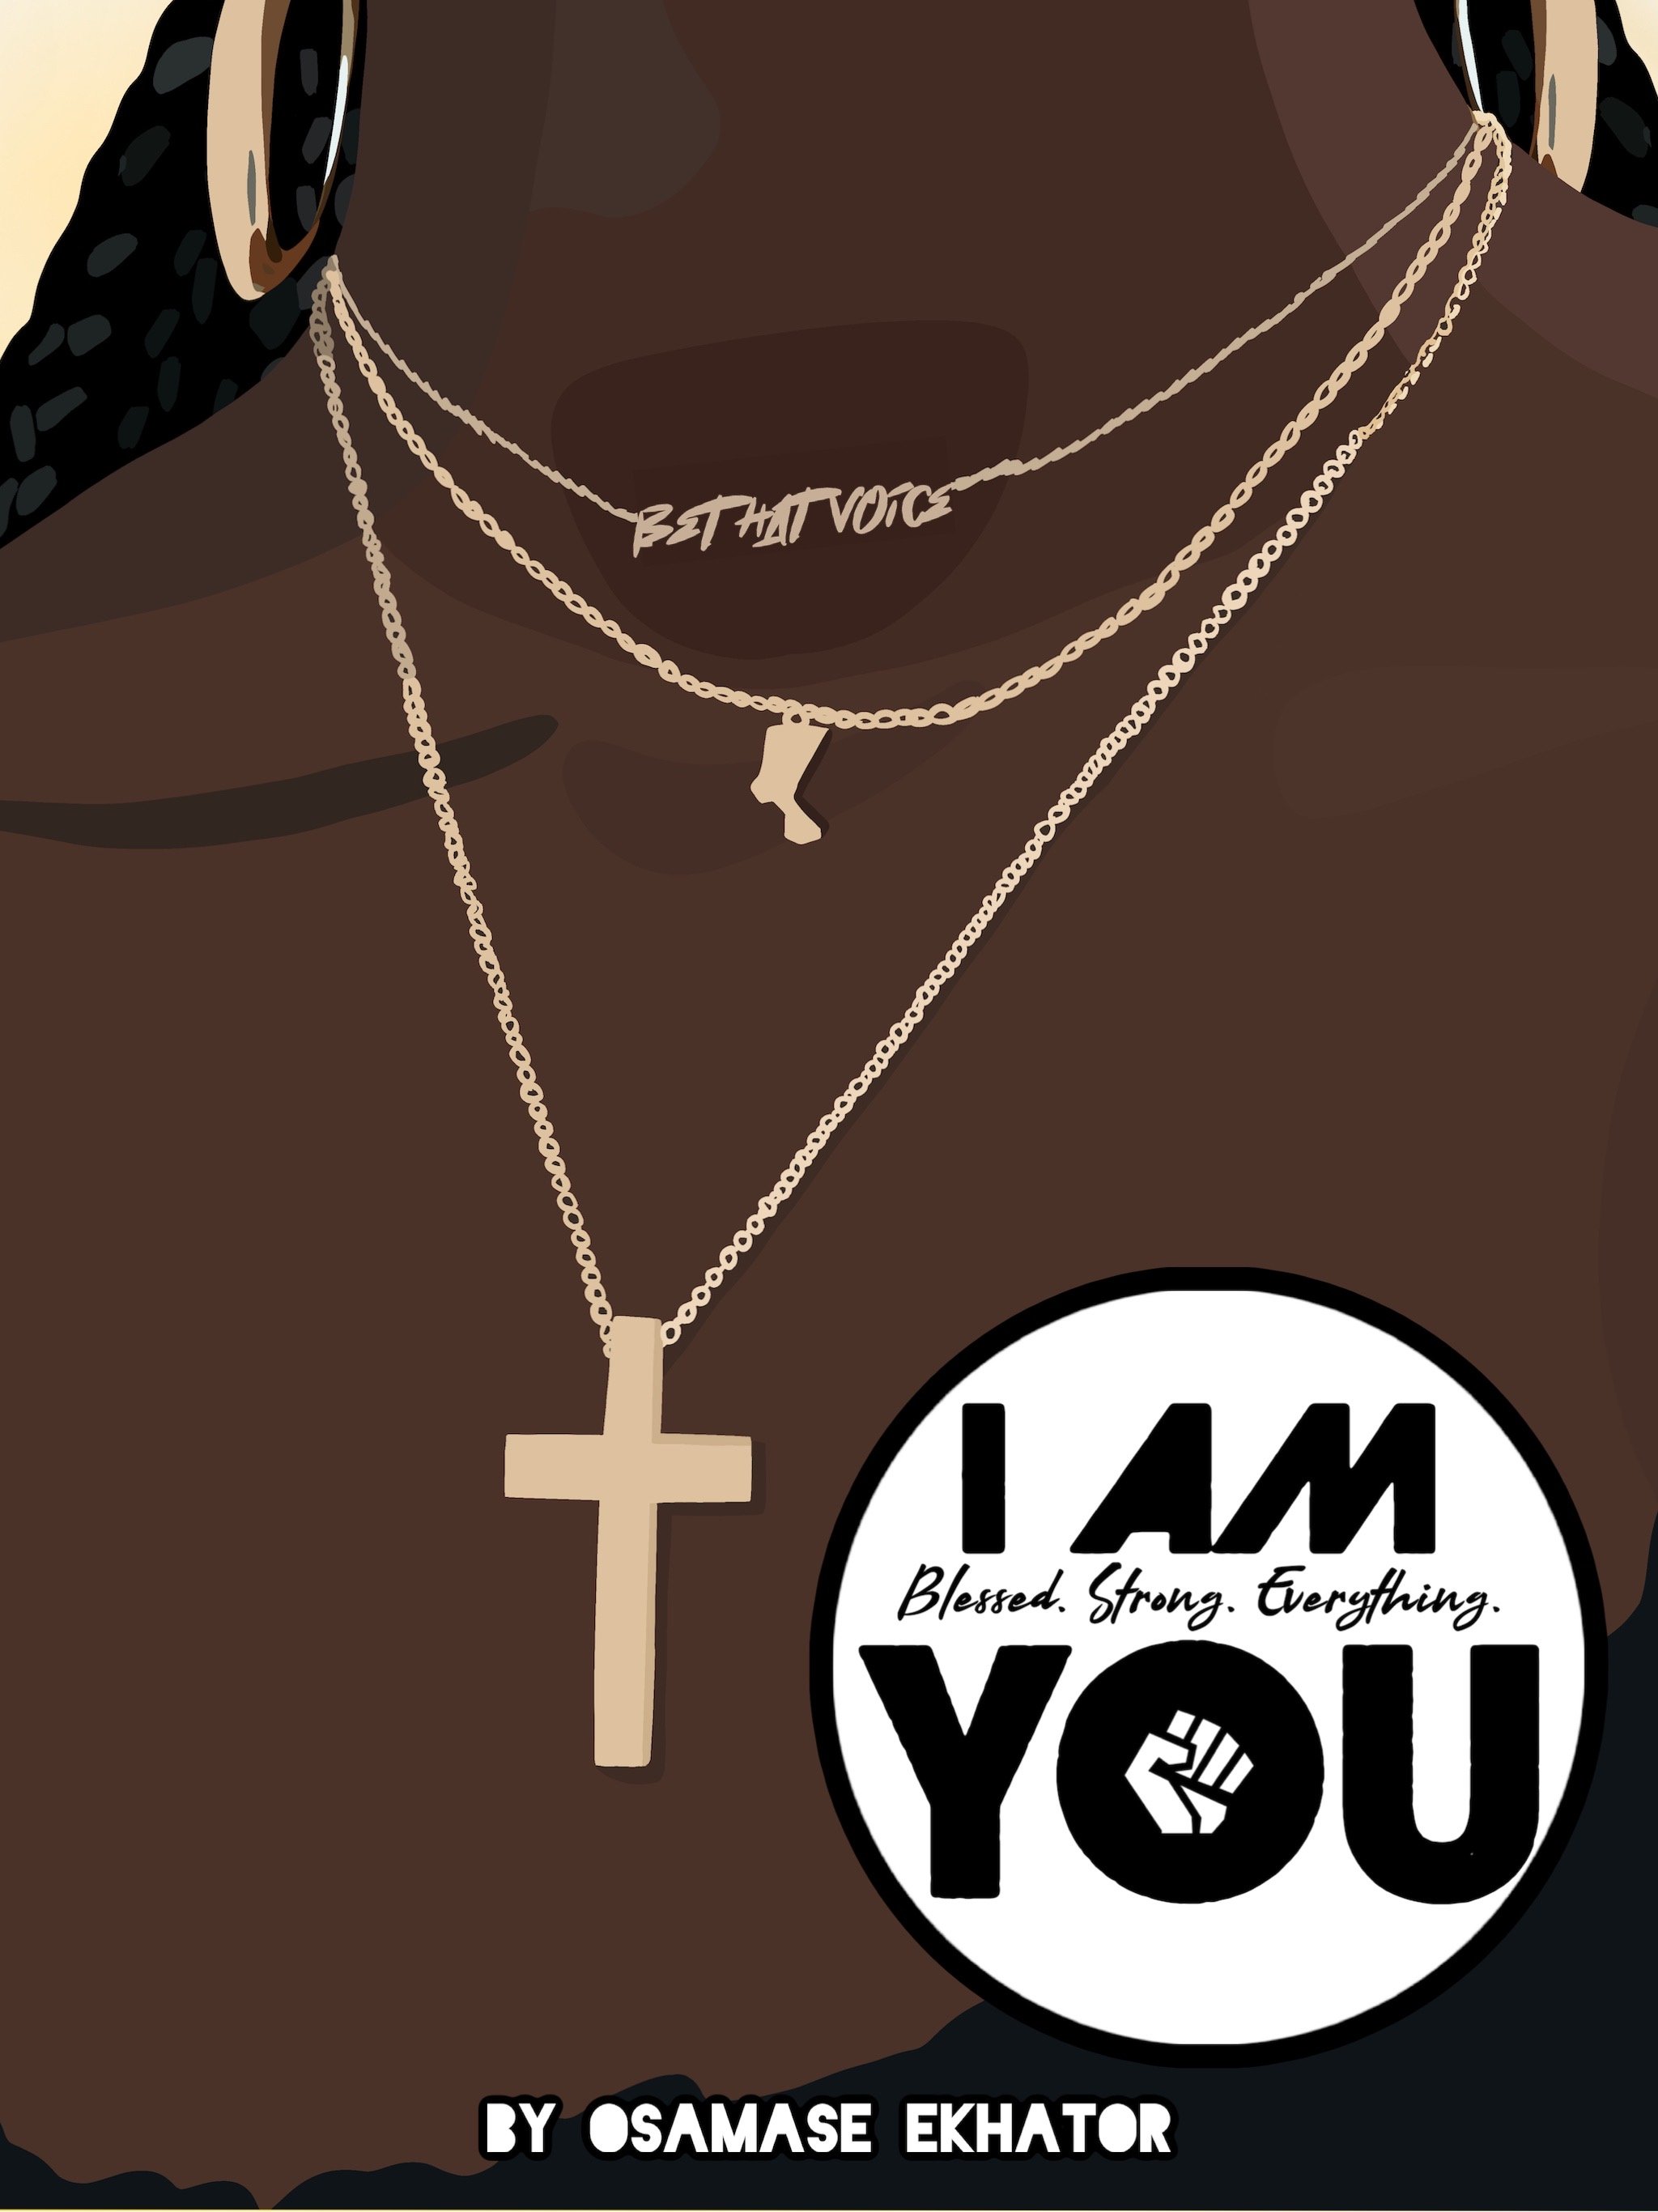 Buy "I AM YOU" and Merch